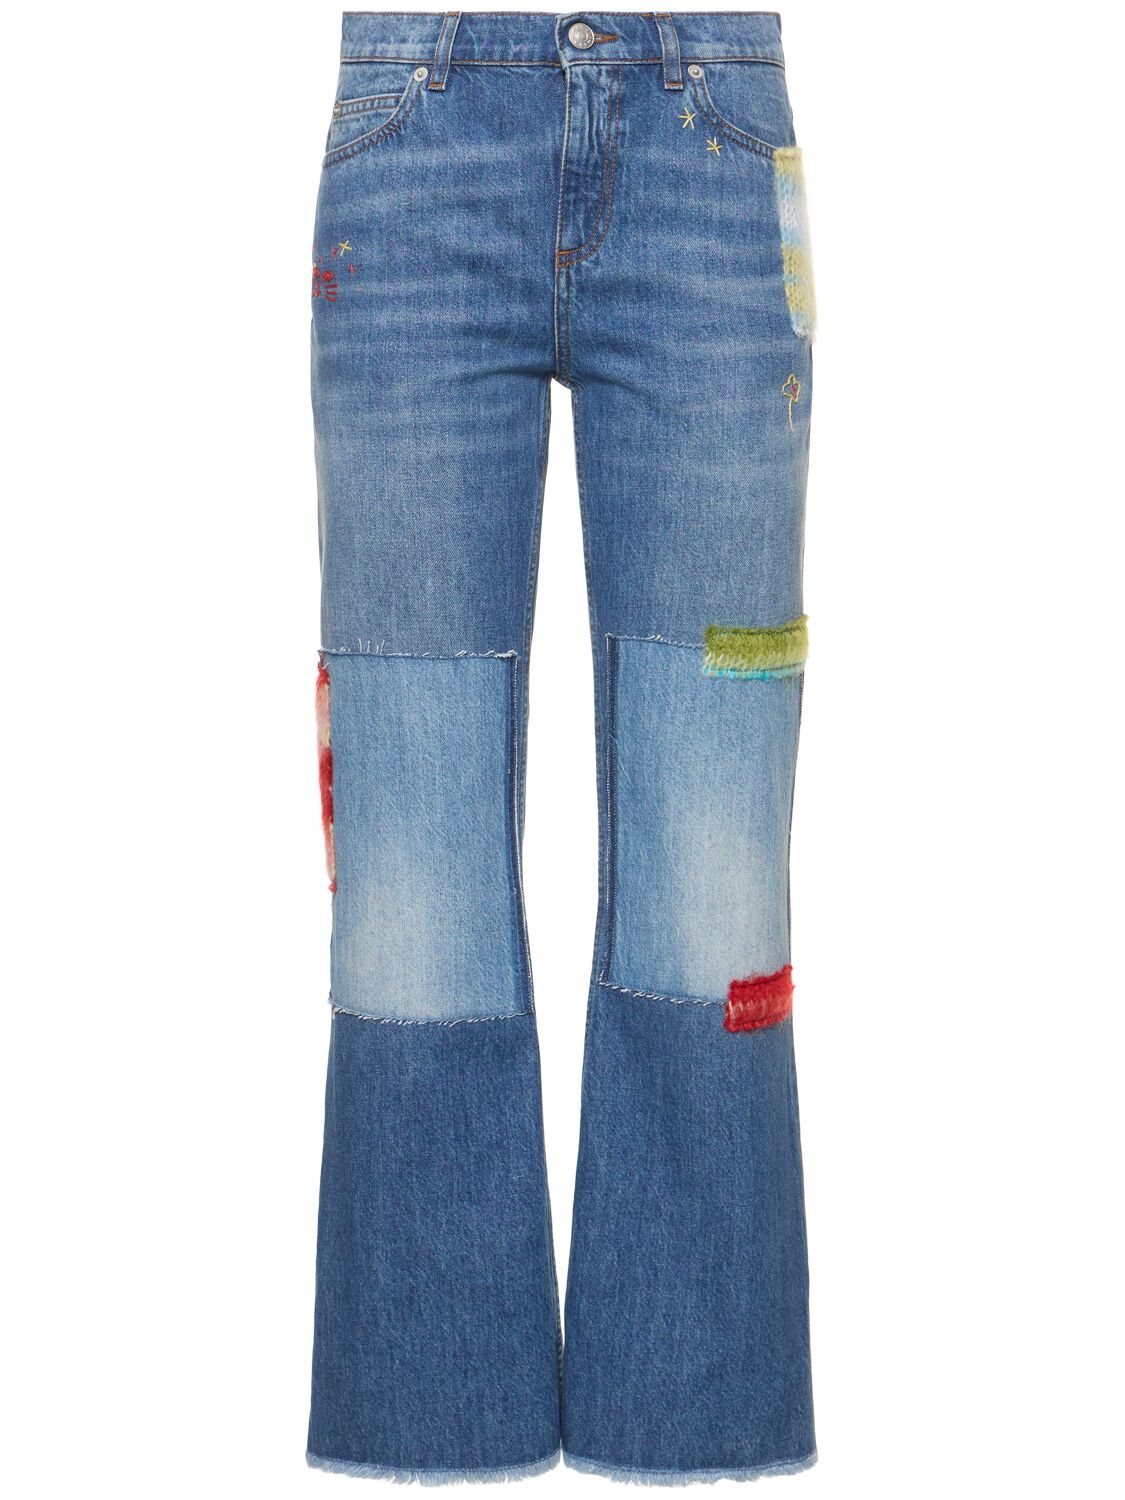 Image of Denim Flared Jeans W/ Patches